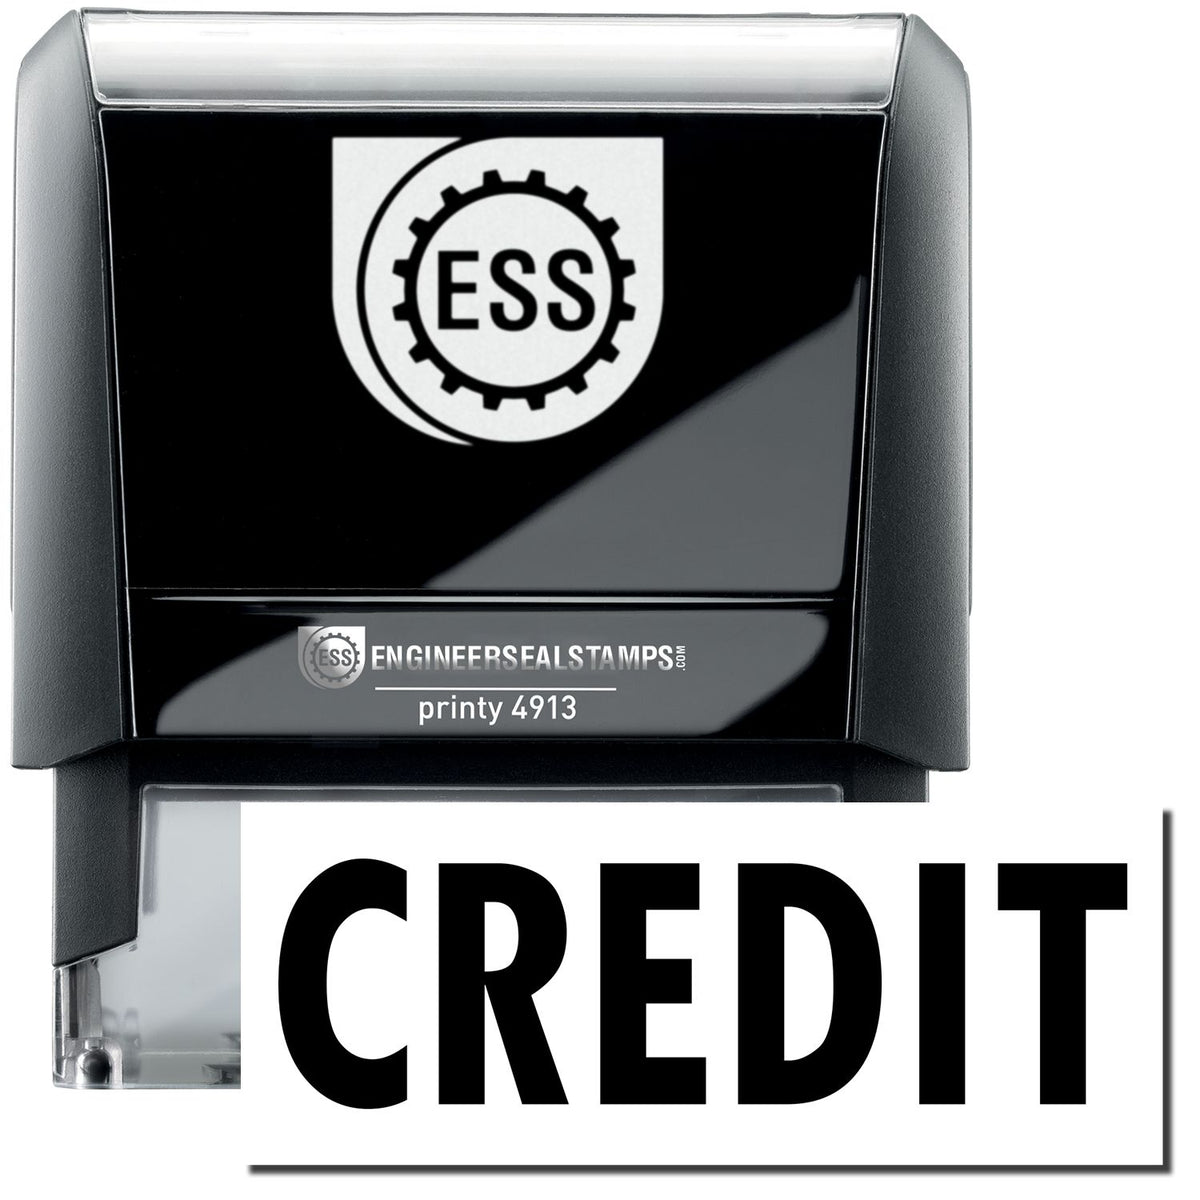 A large self-inking stamp with a stamped image showing how the text &quot;CREDIT&quot; in a large bold font is displayed by it.